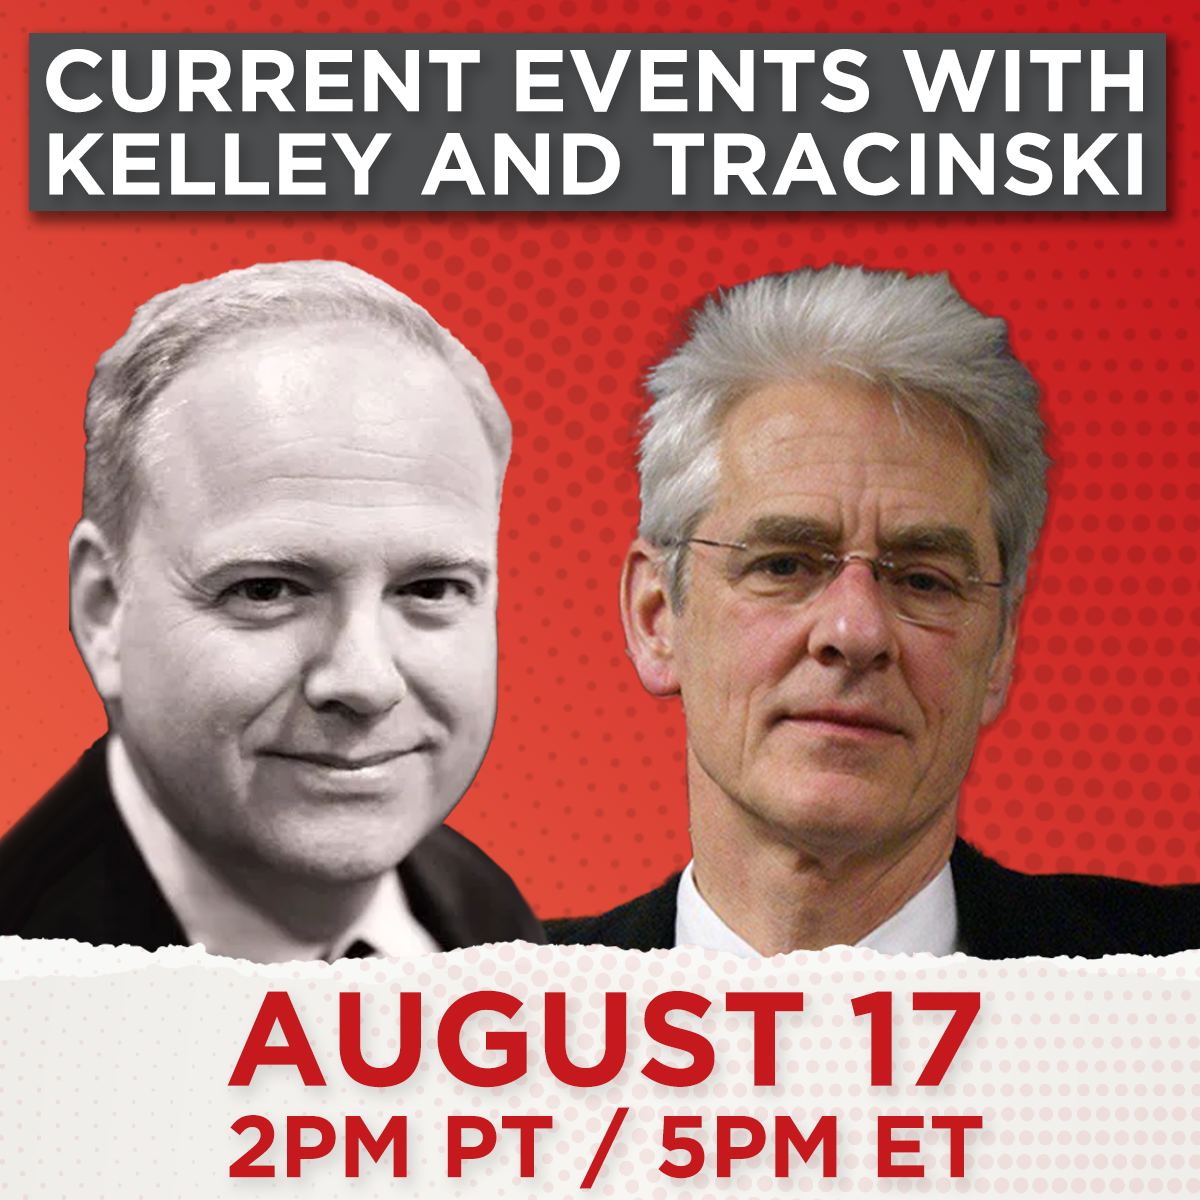 Biden's Inflation Reduction Bill & The Supreme Court on Executive Power: Current Events with Kelley and Tracinski